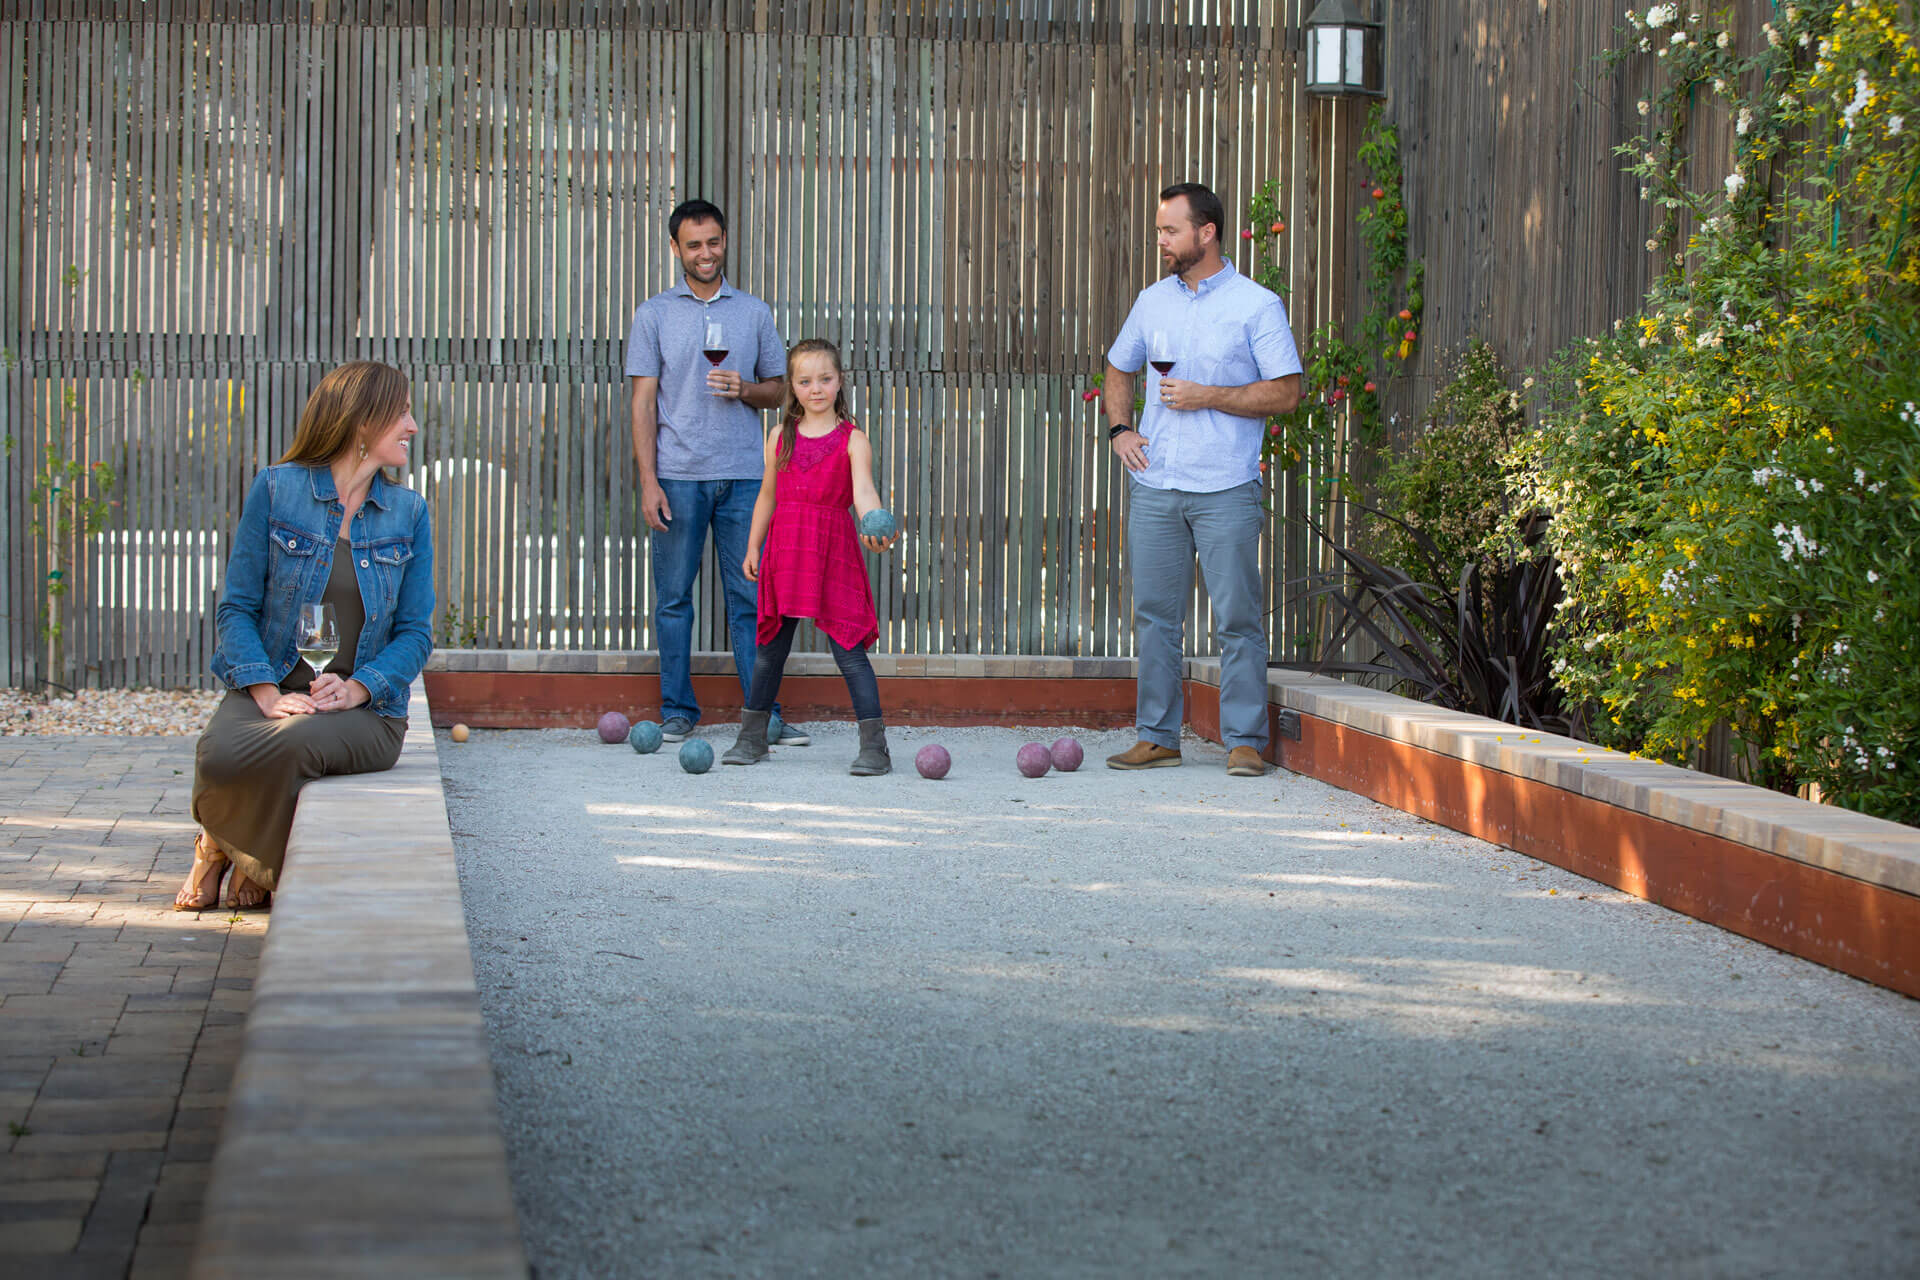 Play in the bocce court